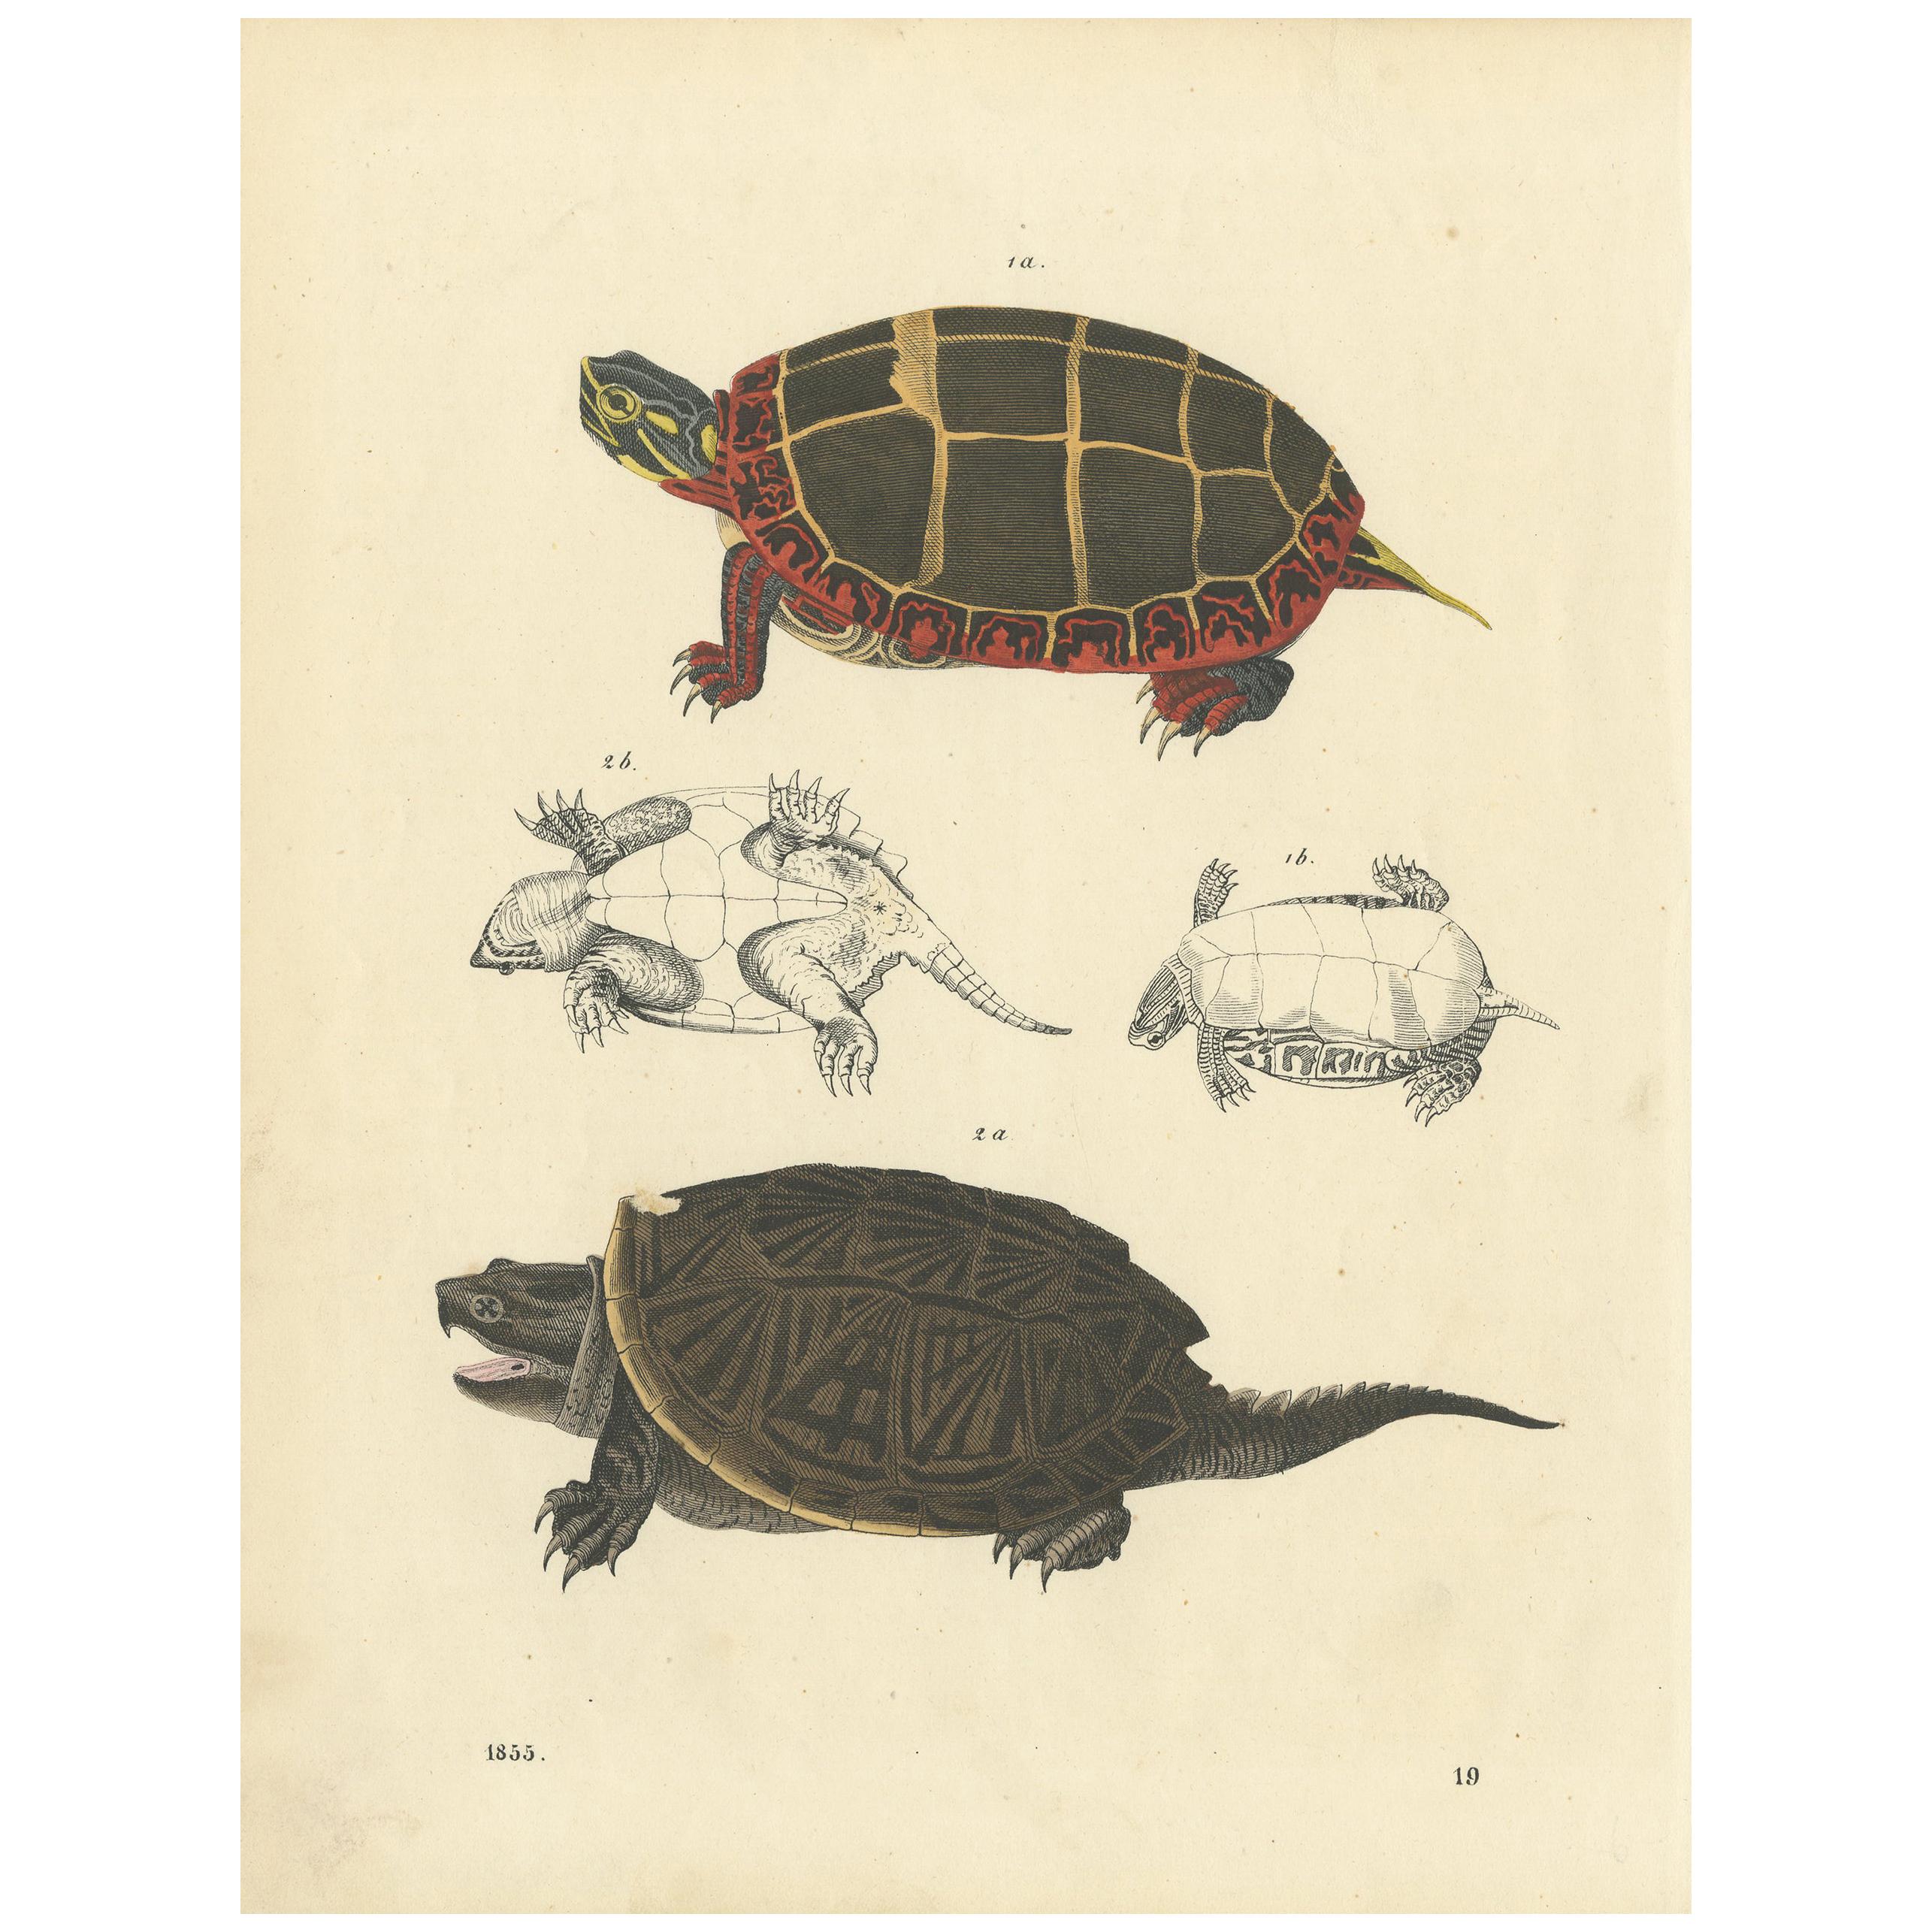 Antique Print of Turtles by Hoffmann '1855'